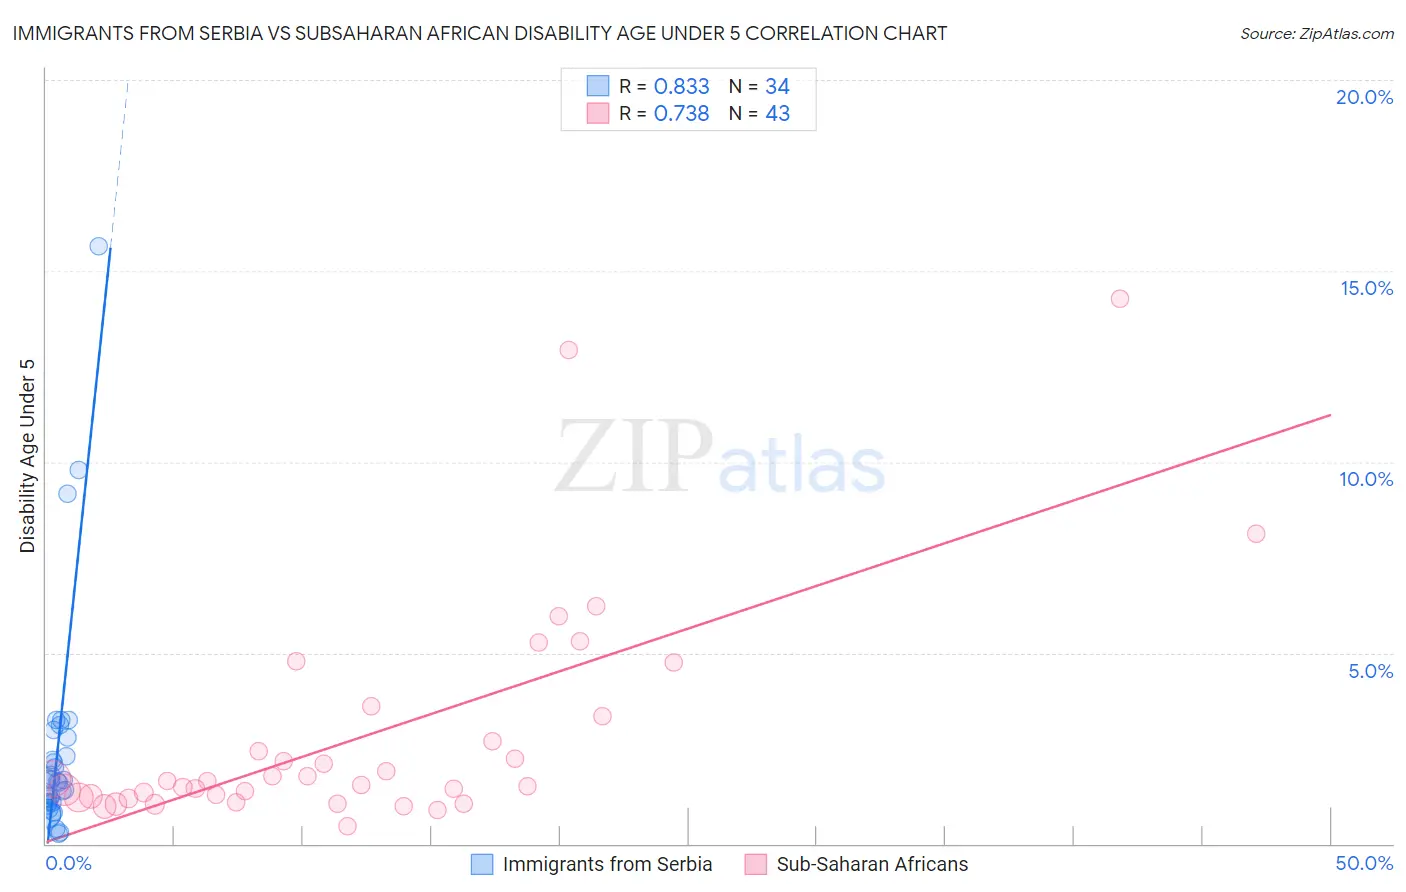 Immigrants from Serbia vs Subsaharan African Disability Age Under 5